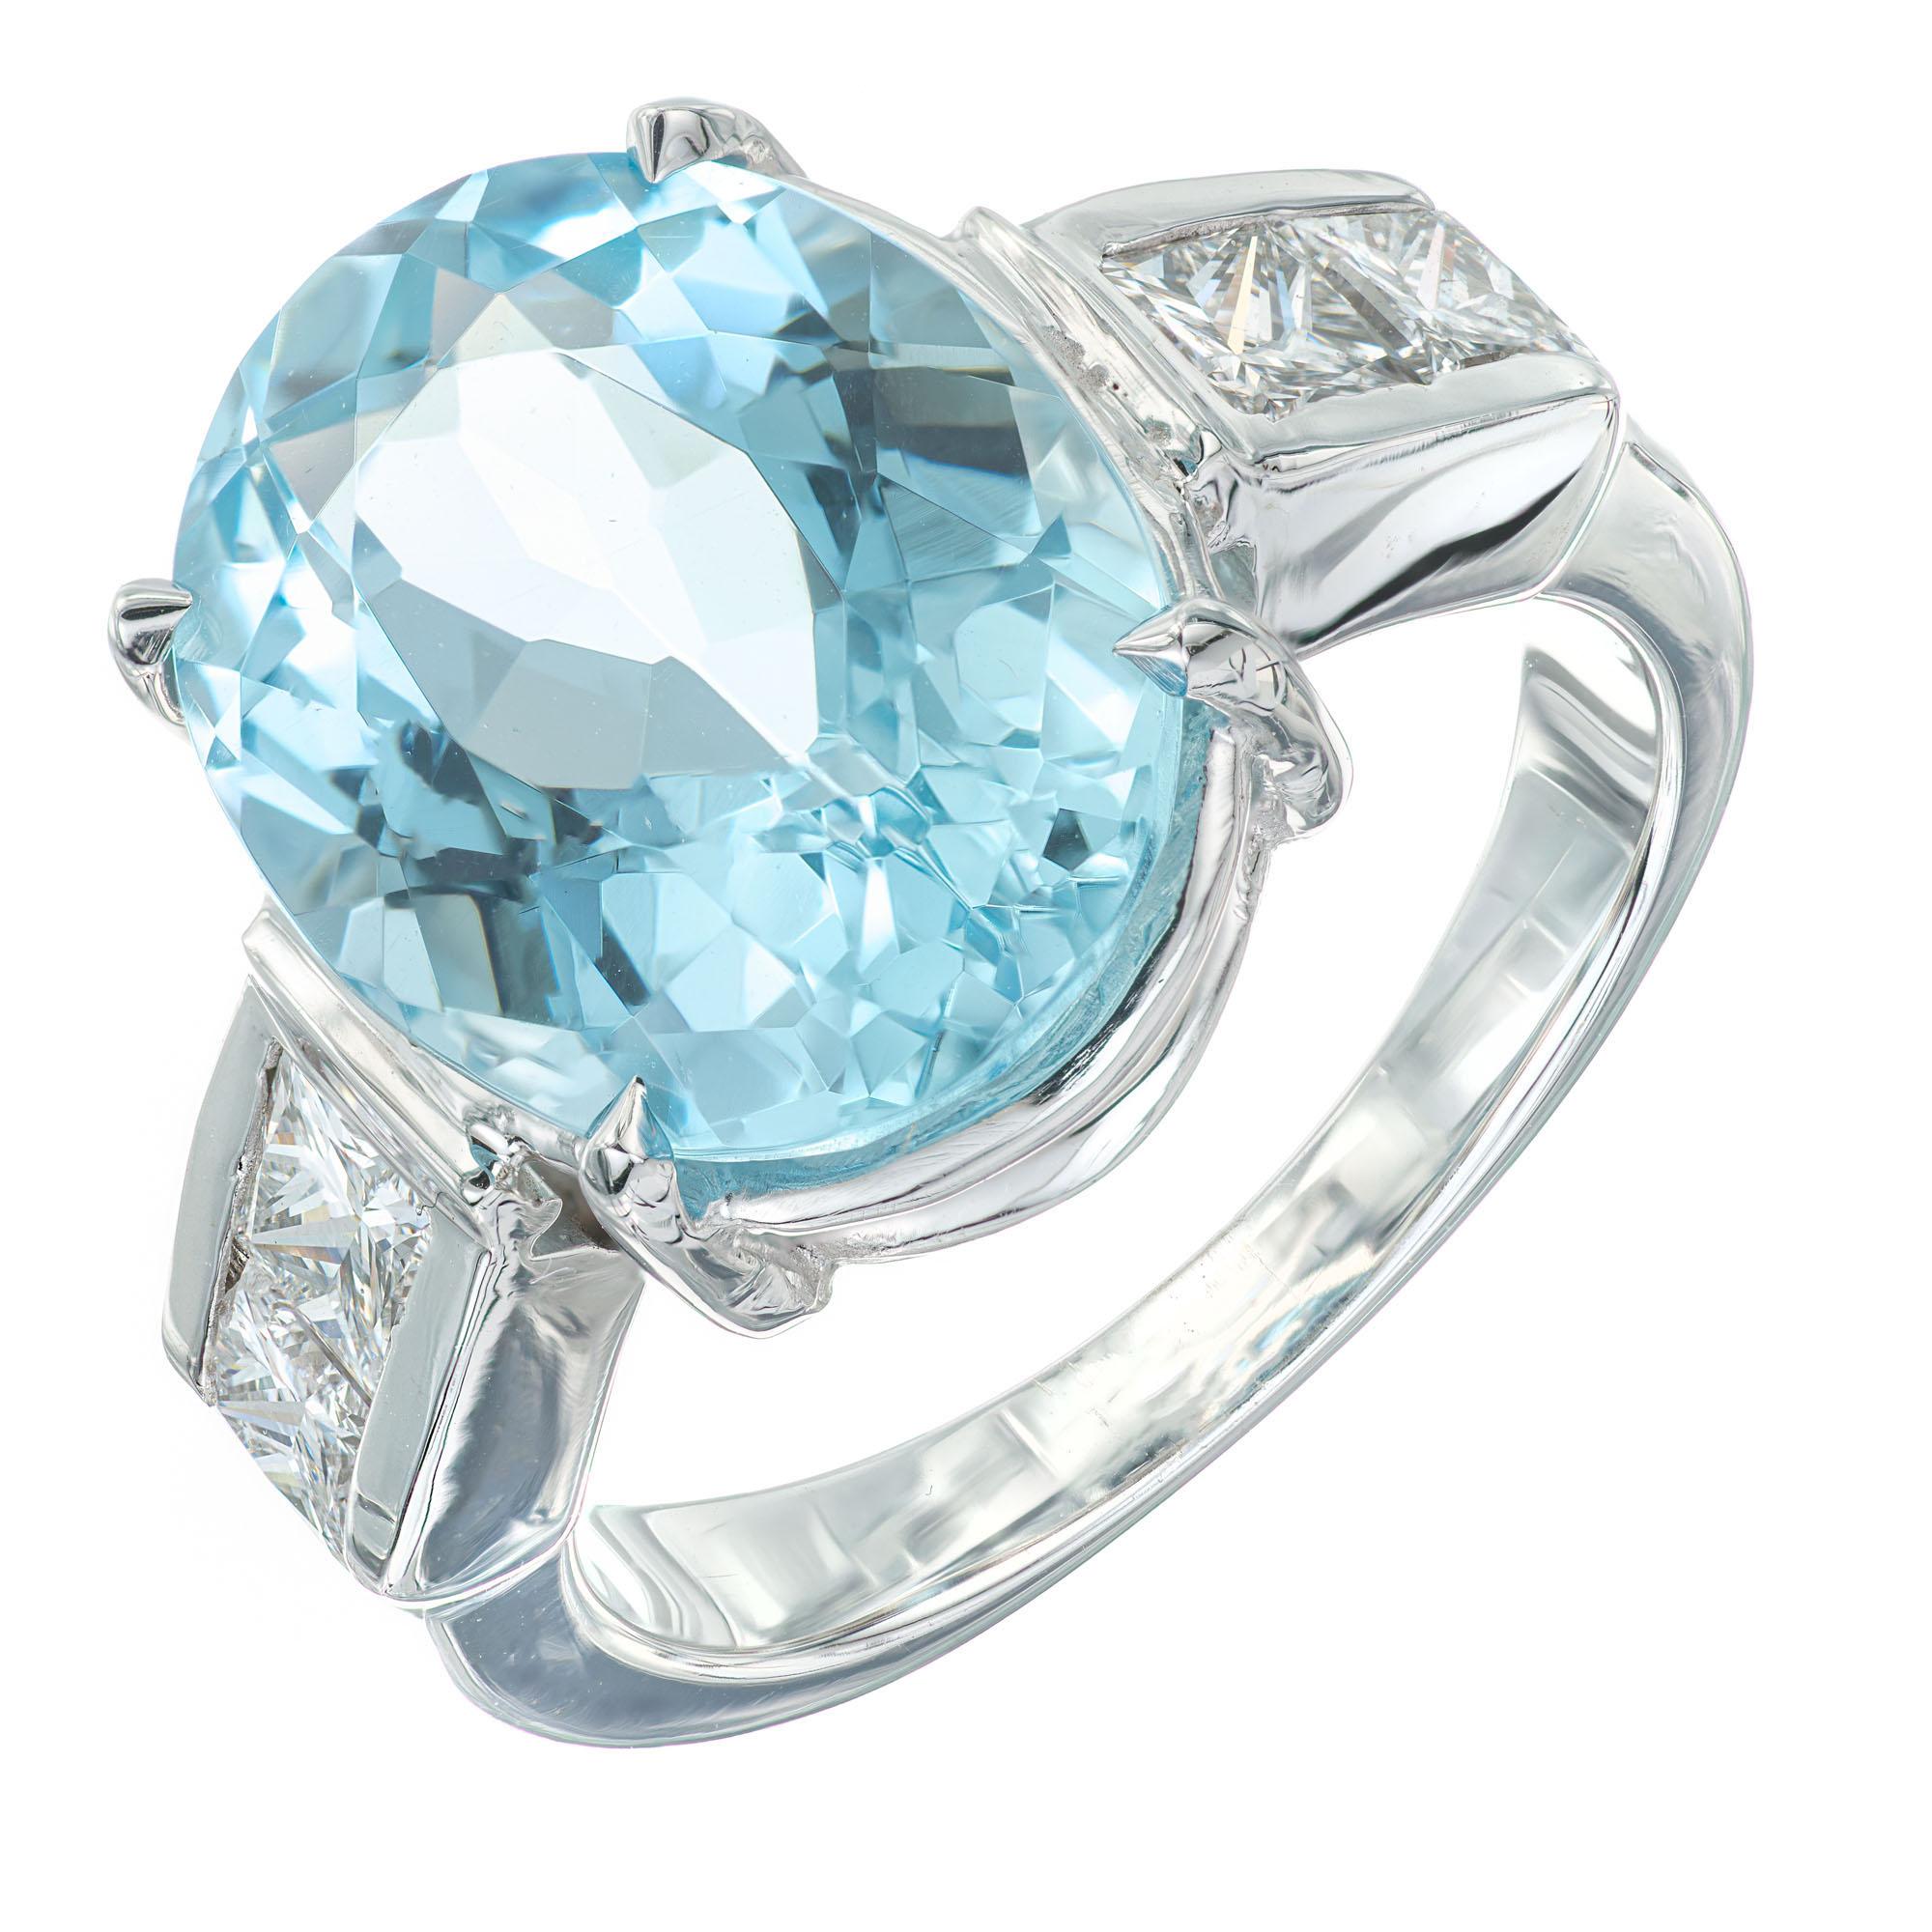 Oval and diamond engagement ring. 6.30ct oval natural untreated aquamarine in a 18k white gold setting with 4 princess cut accent diamonds.

1 oval blue aquamarine, approx. 6.30cts
4 princess cut diamonds, G-H VS-SI approx. .60cts
Size 6.5 and